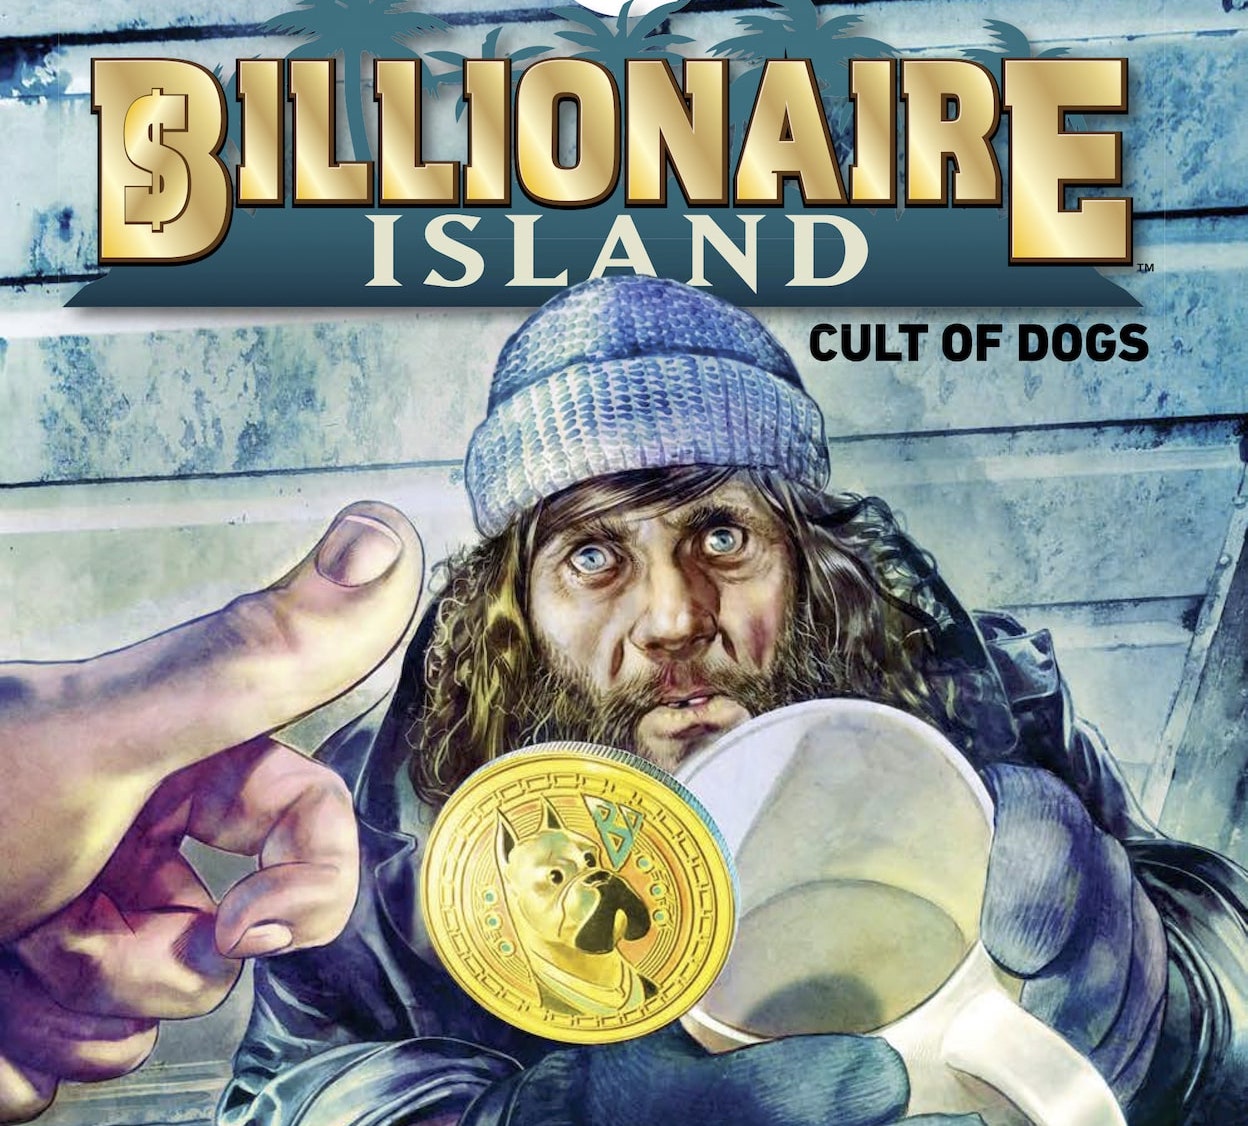 EXCLUSIVE AHOY Preview: Billionaire Island: Cult of Dogs #2